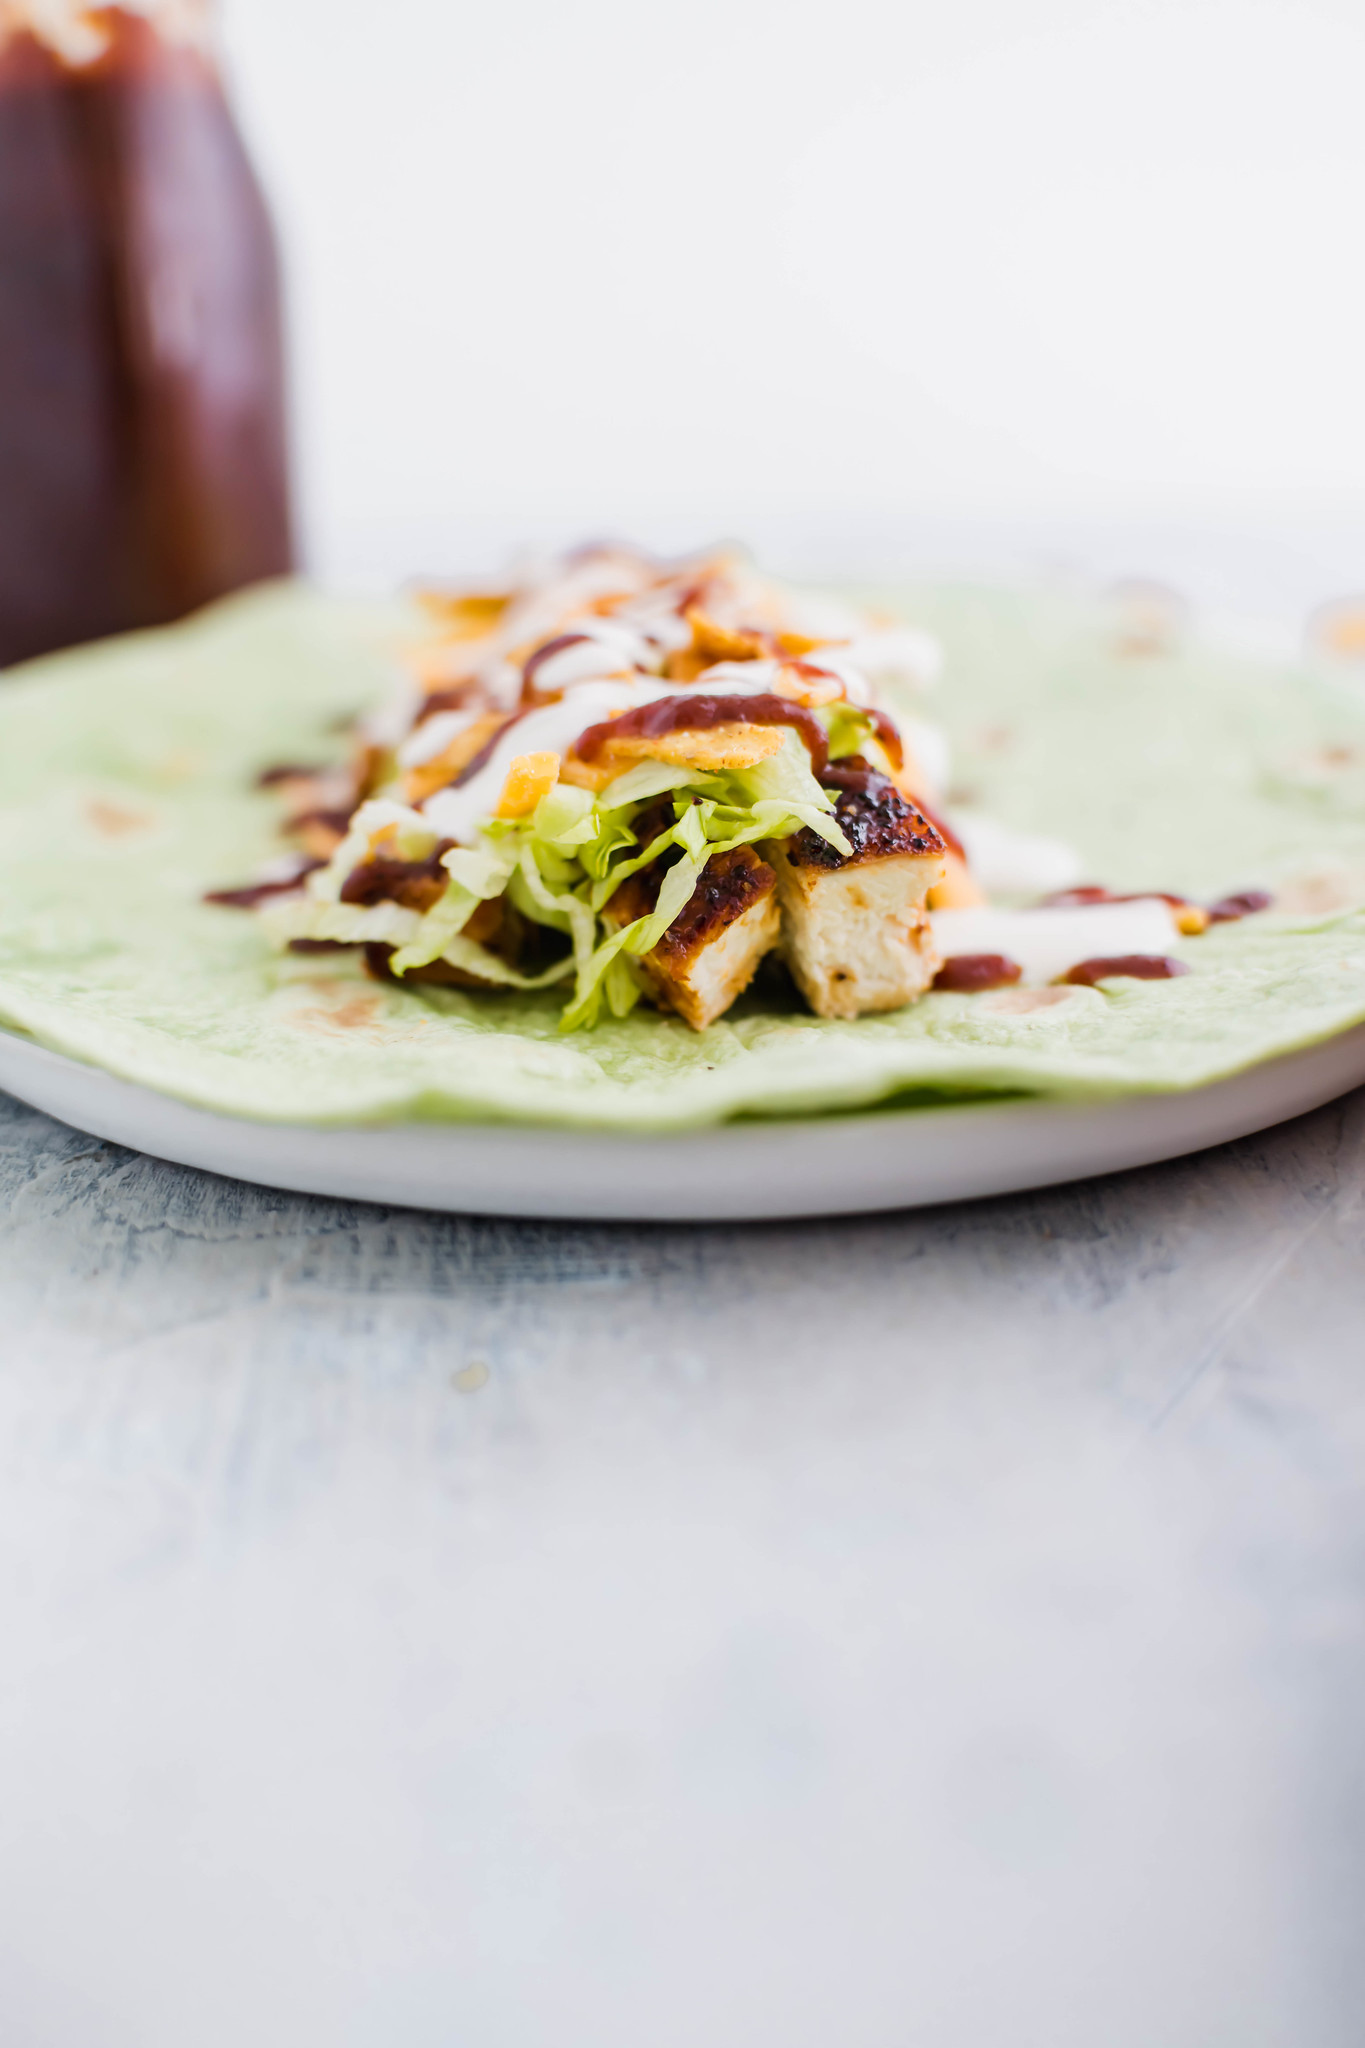 Spinach tortilla on a plate with barbecue chicken, lettuce, cheese, tortilla strips, barbecue sauce and ranch on top.